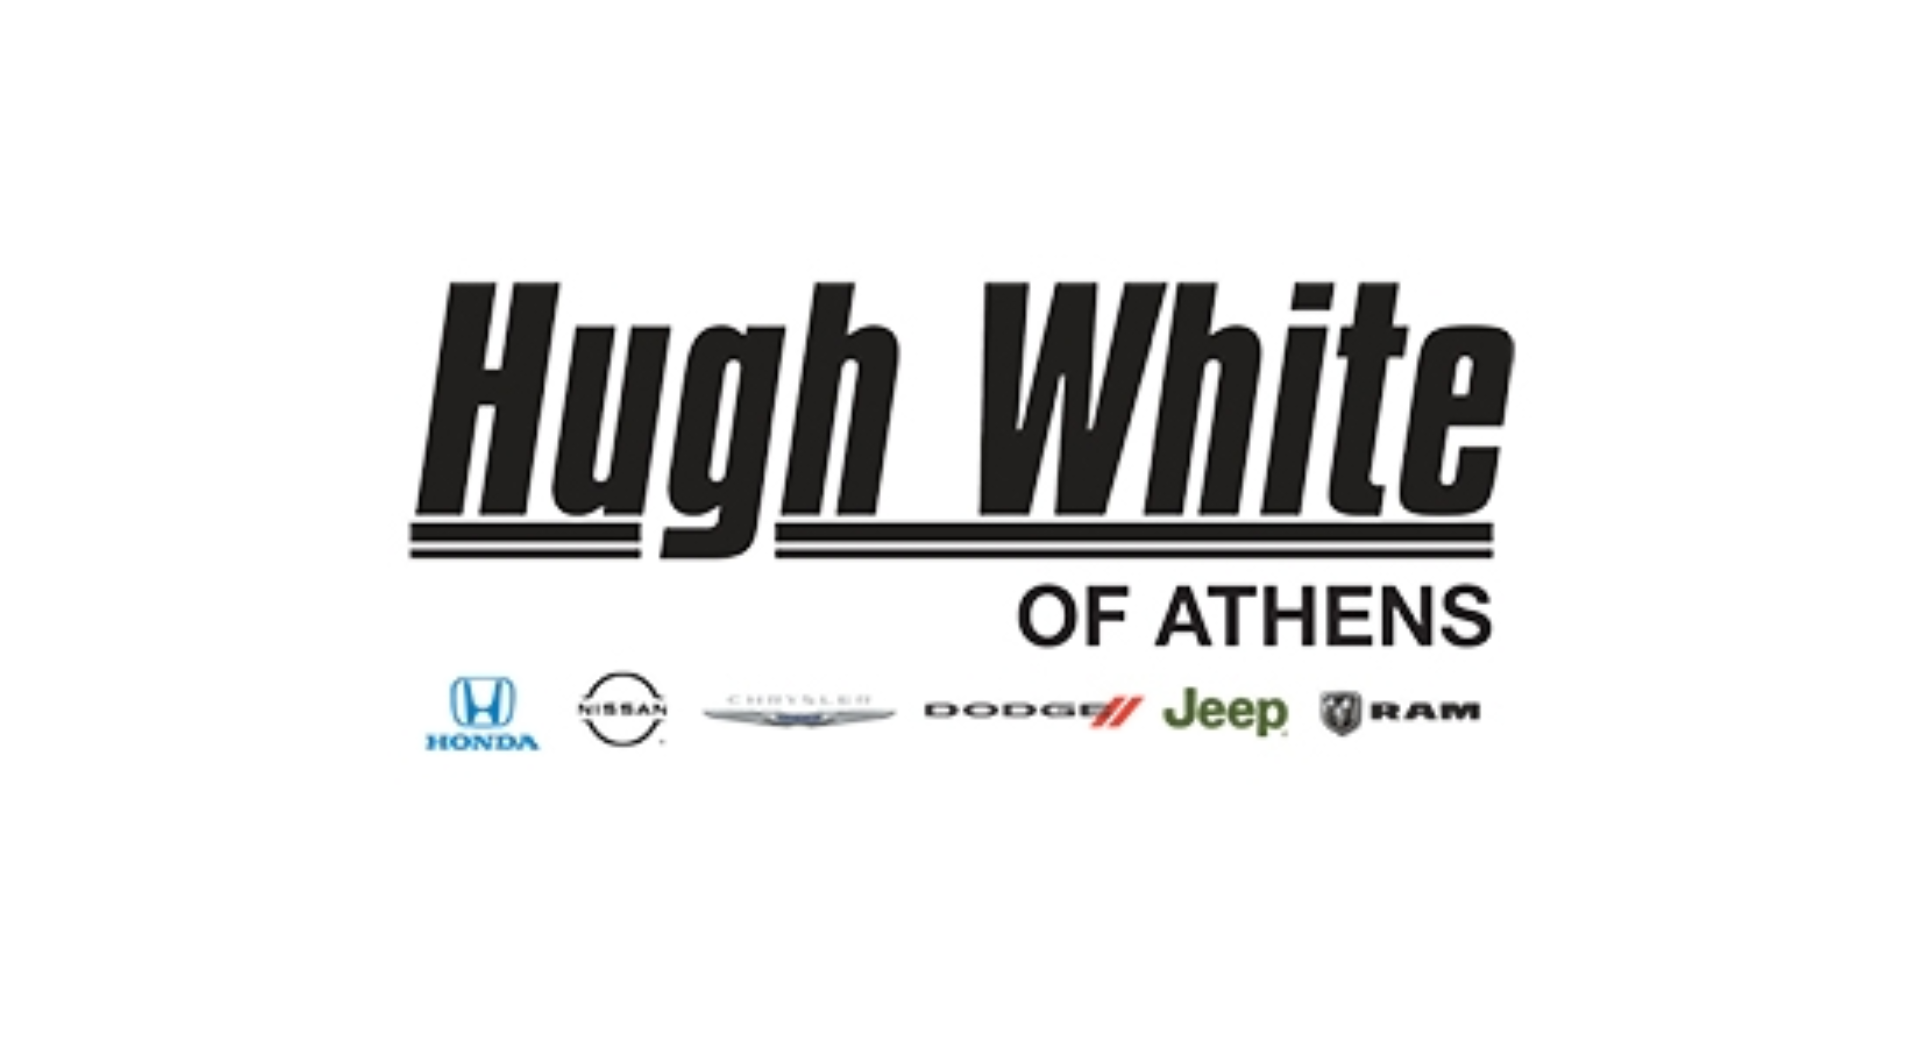 Hugh White CDJR is a Certified Agriculture Dealership.